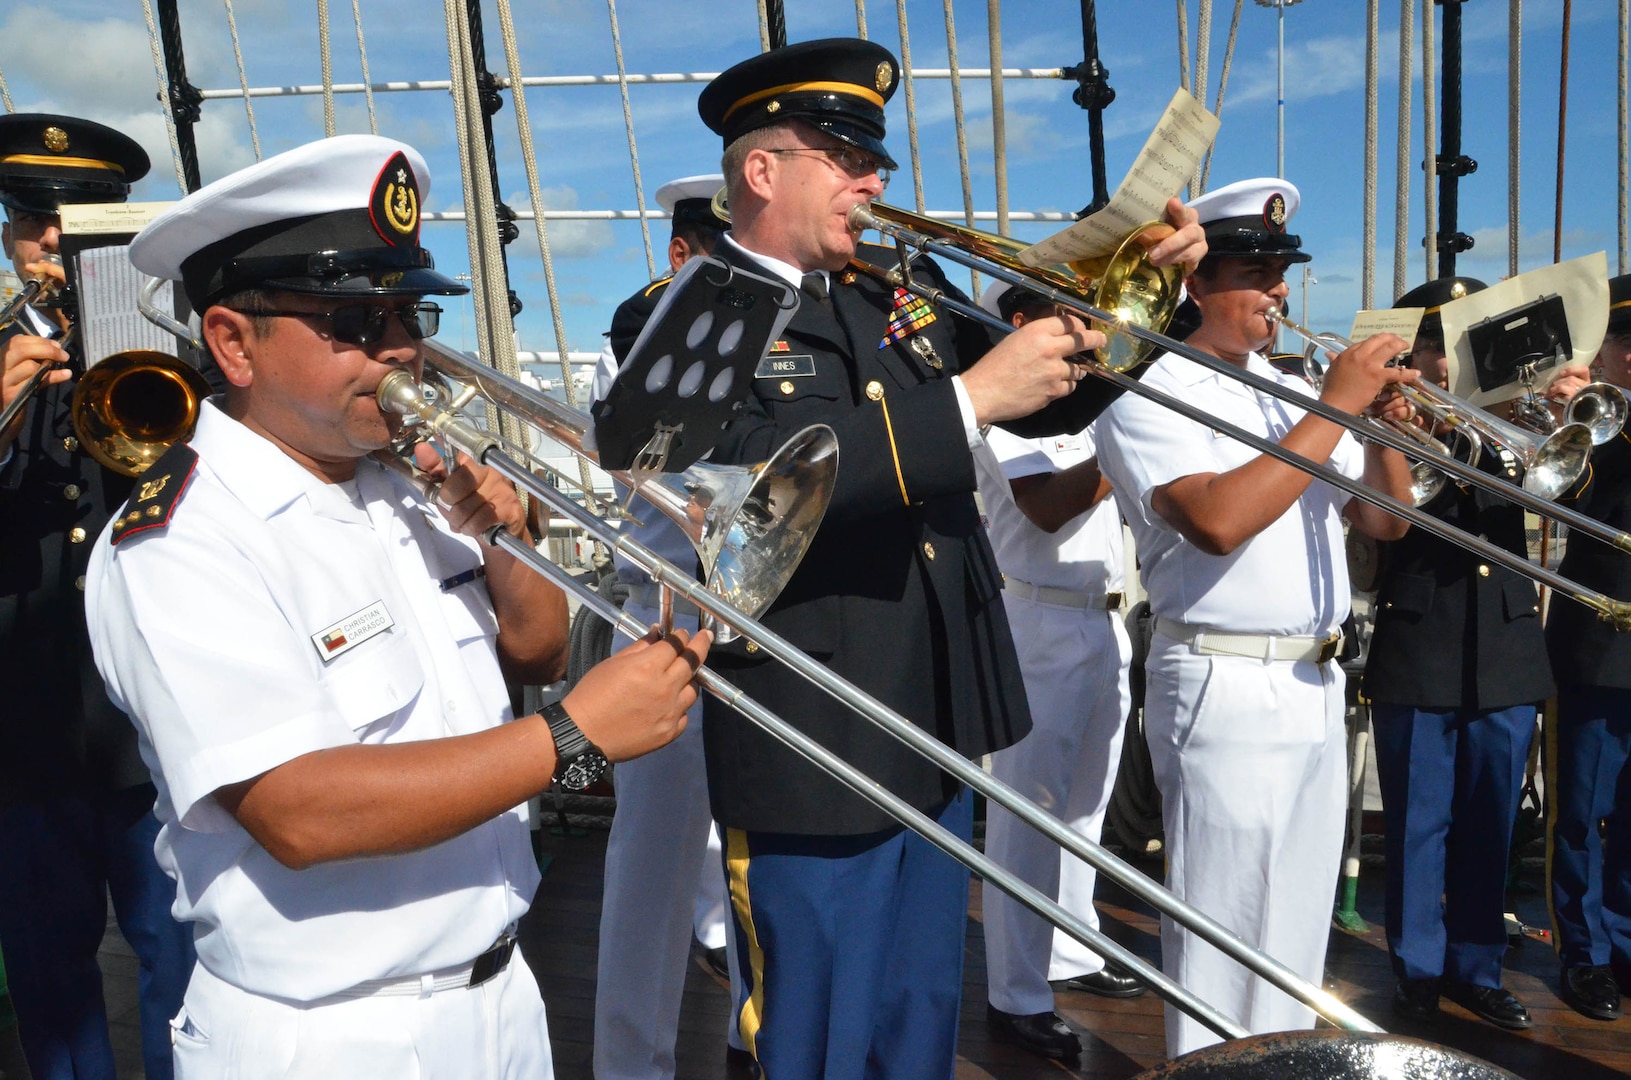 Soldiers from the Florida Army National Guard's 13th Army Band play with members of the Chilean military band during a subject matter exchange on board the Chilean ship Esmeralda at the Port of Miami, Dec. 4, 2013. Both bands played military music from each other's nations during the day-long exchange.